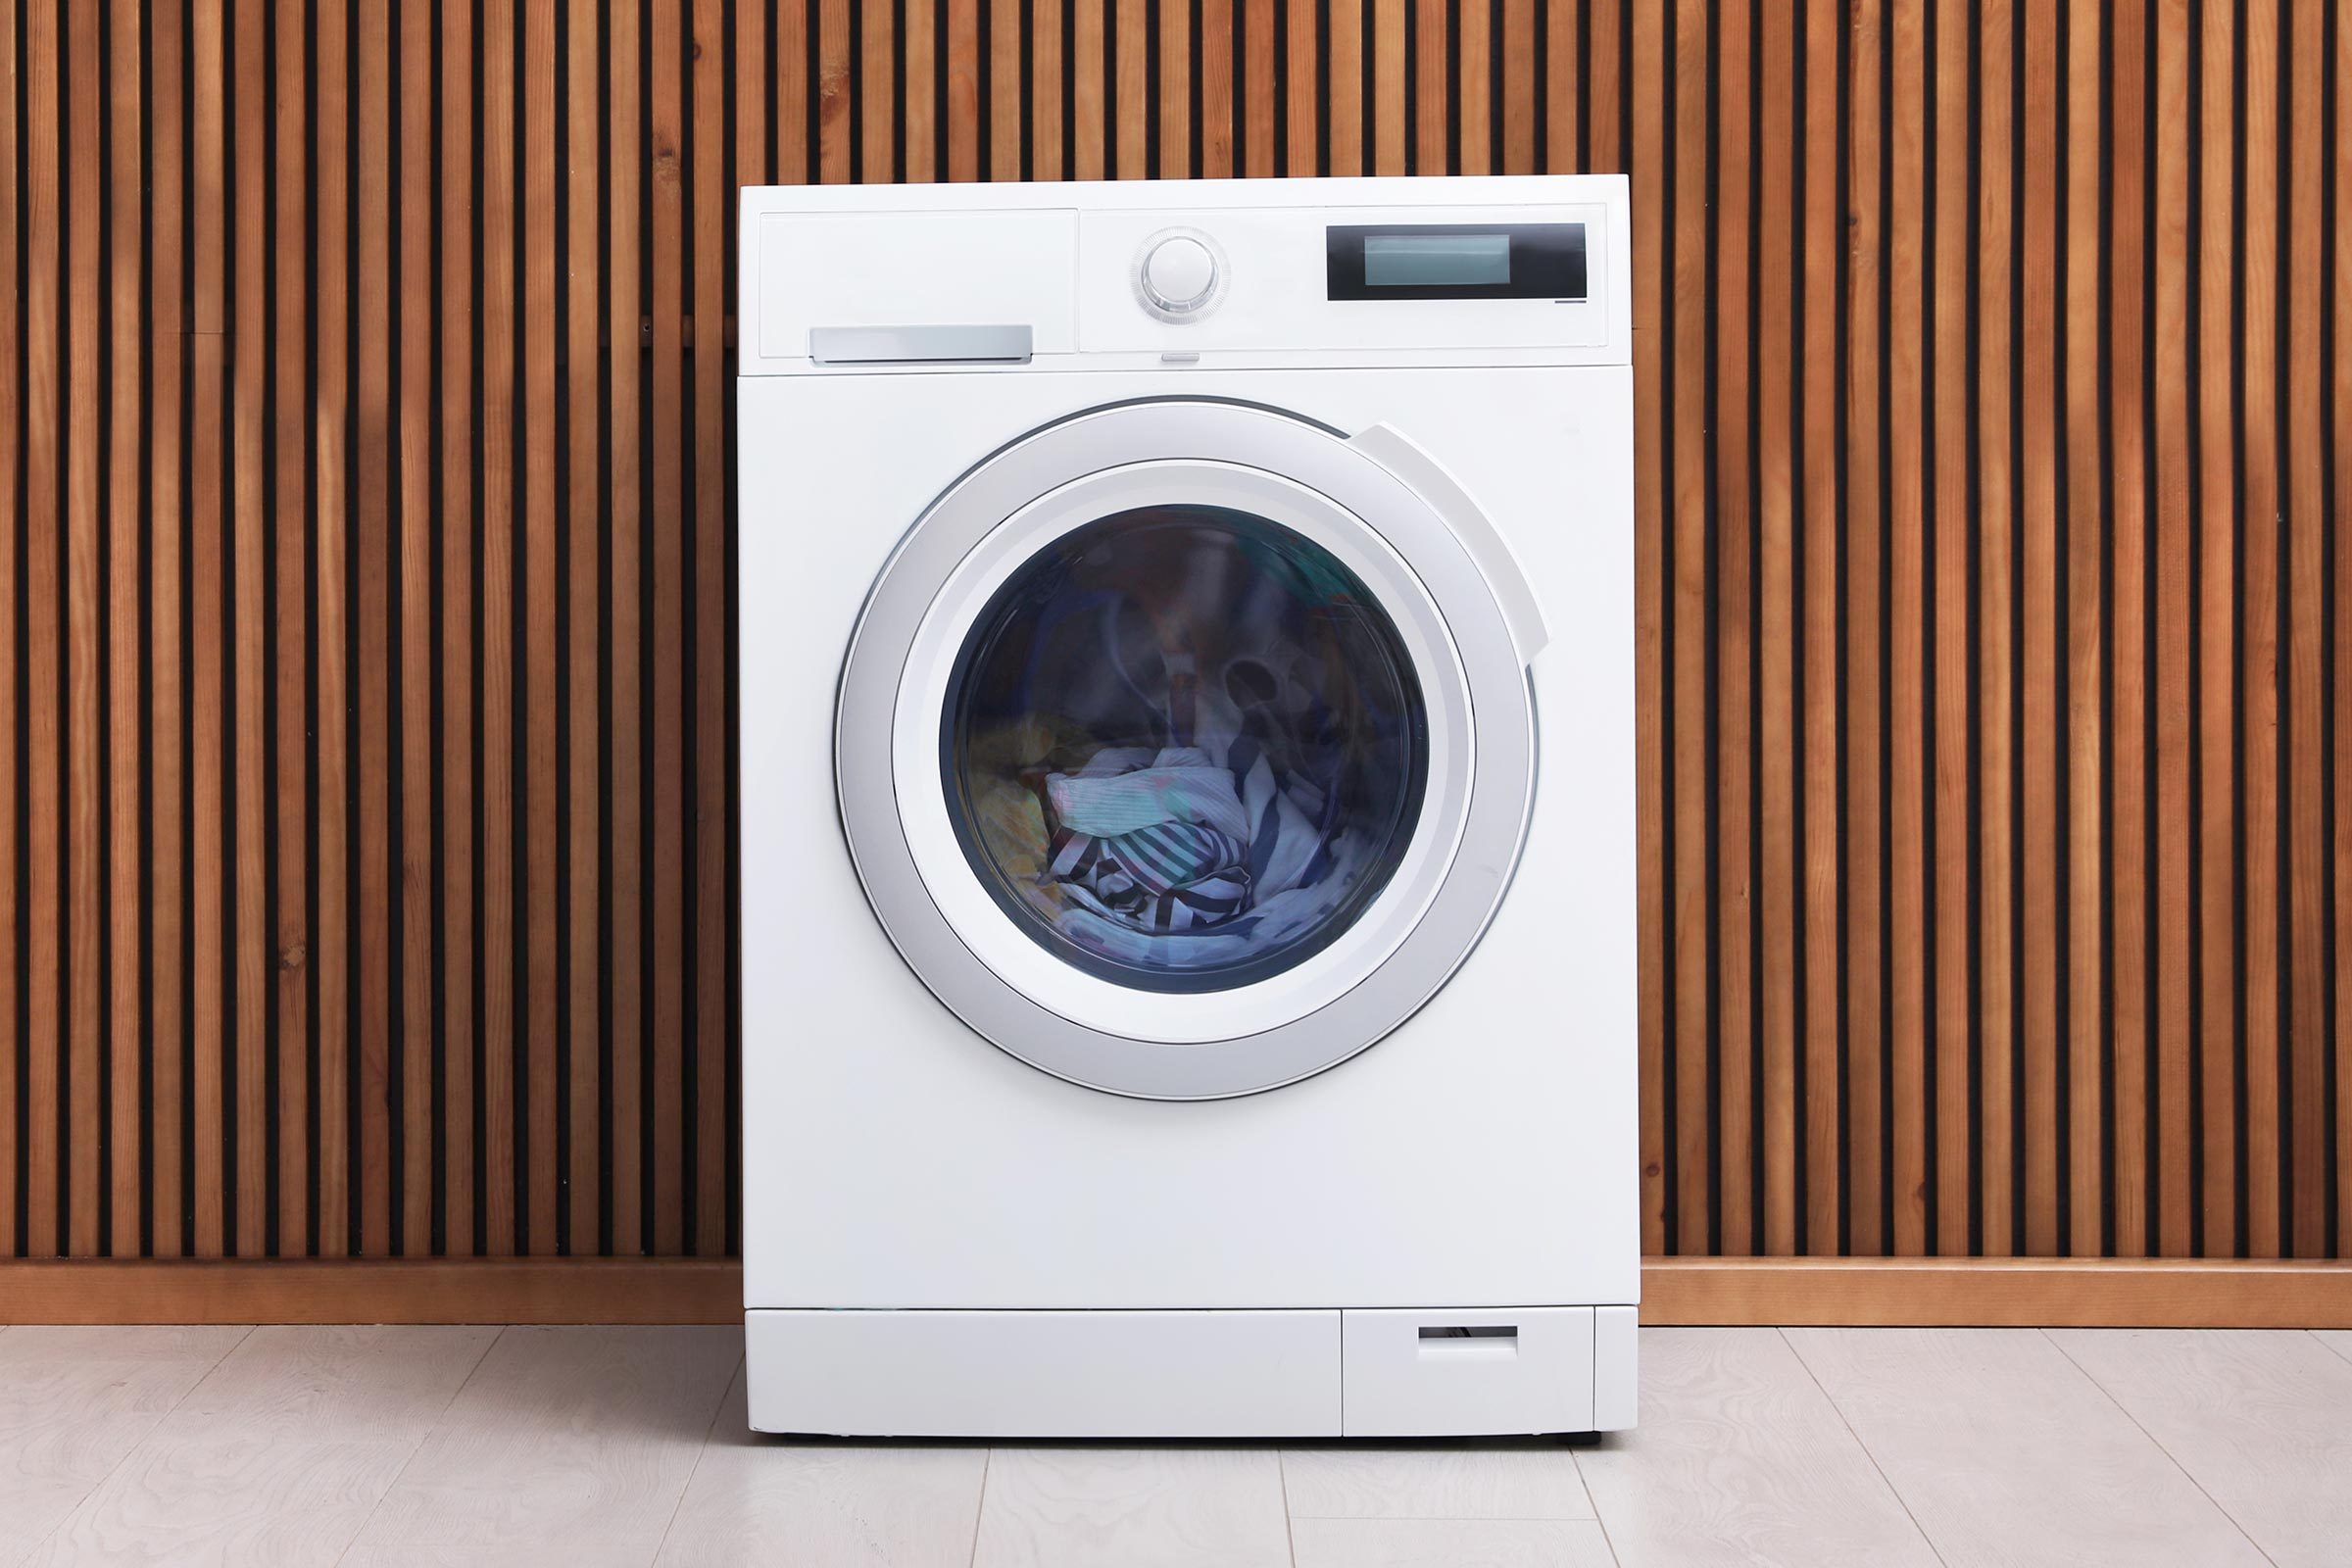 The 2 Ingredients You Should Be Putting in Your Washing Machine